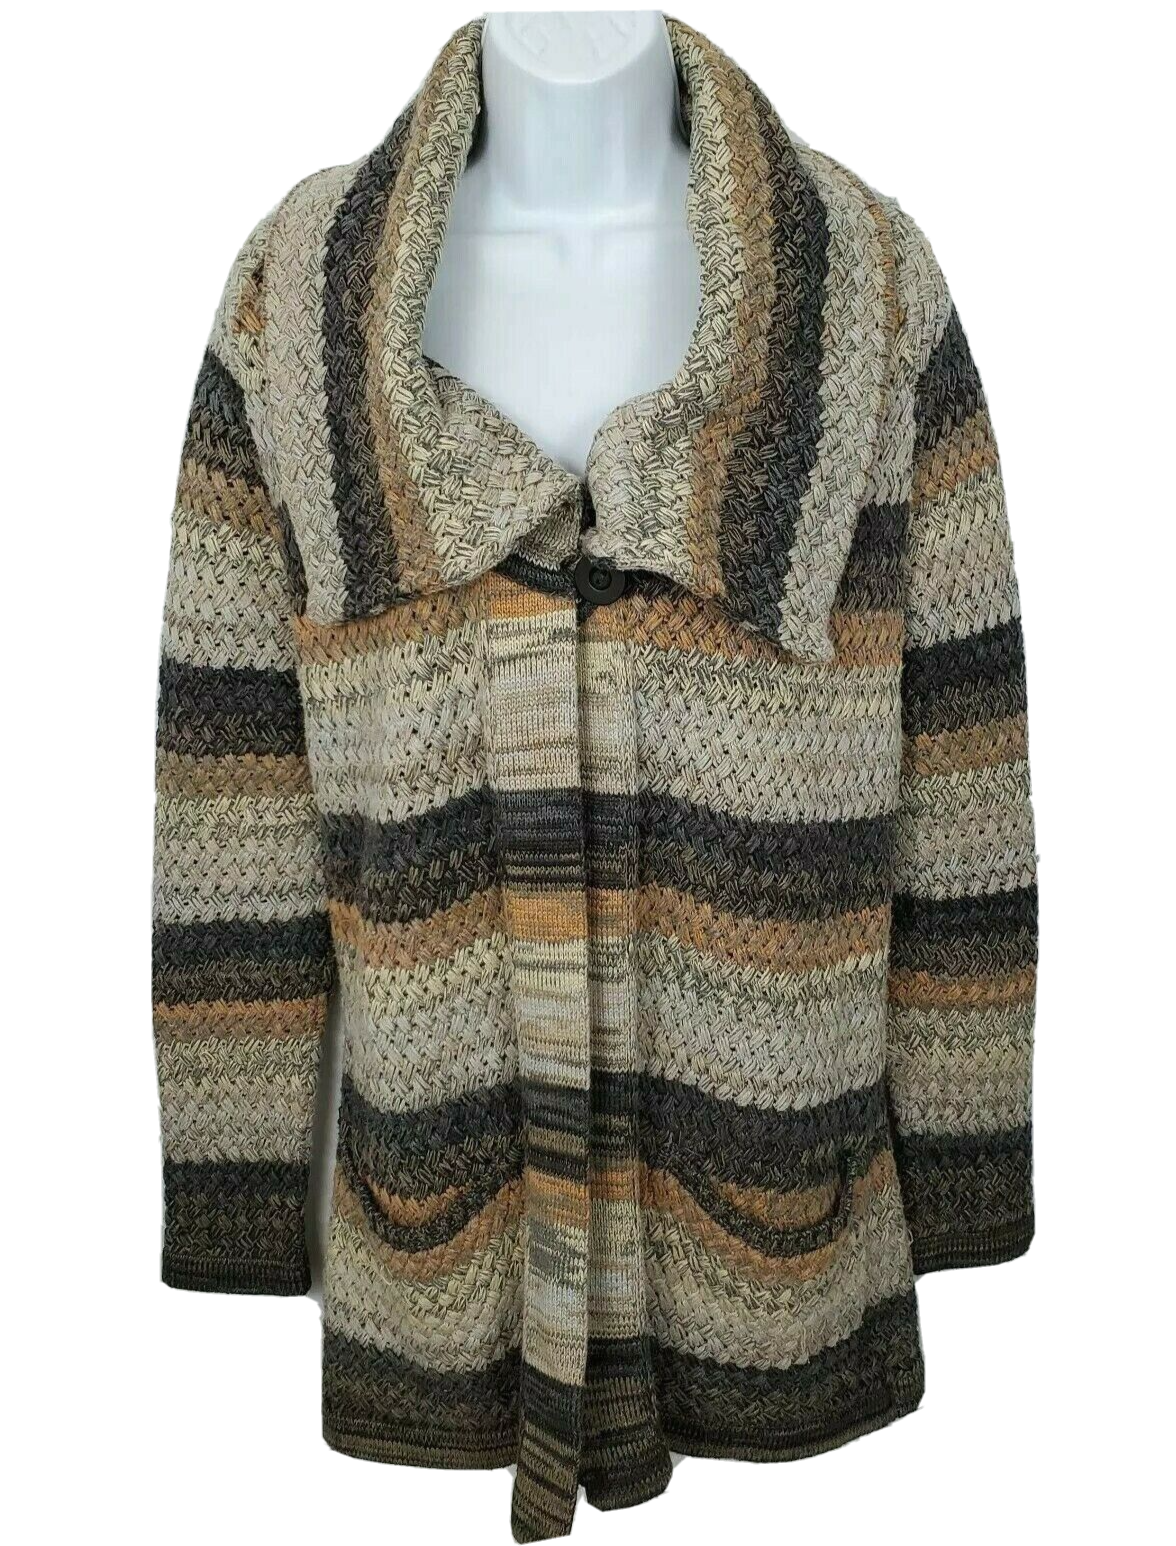 Primary image for Goddis Knit Weave Cardigan Sweater Size S / M Womens